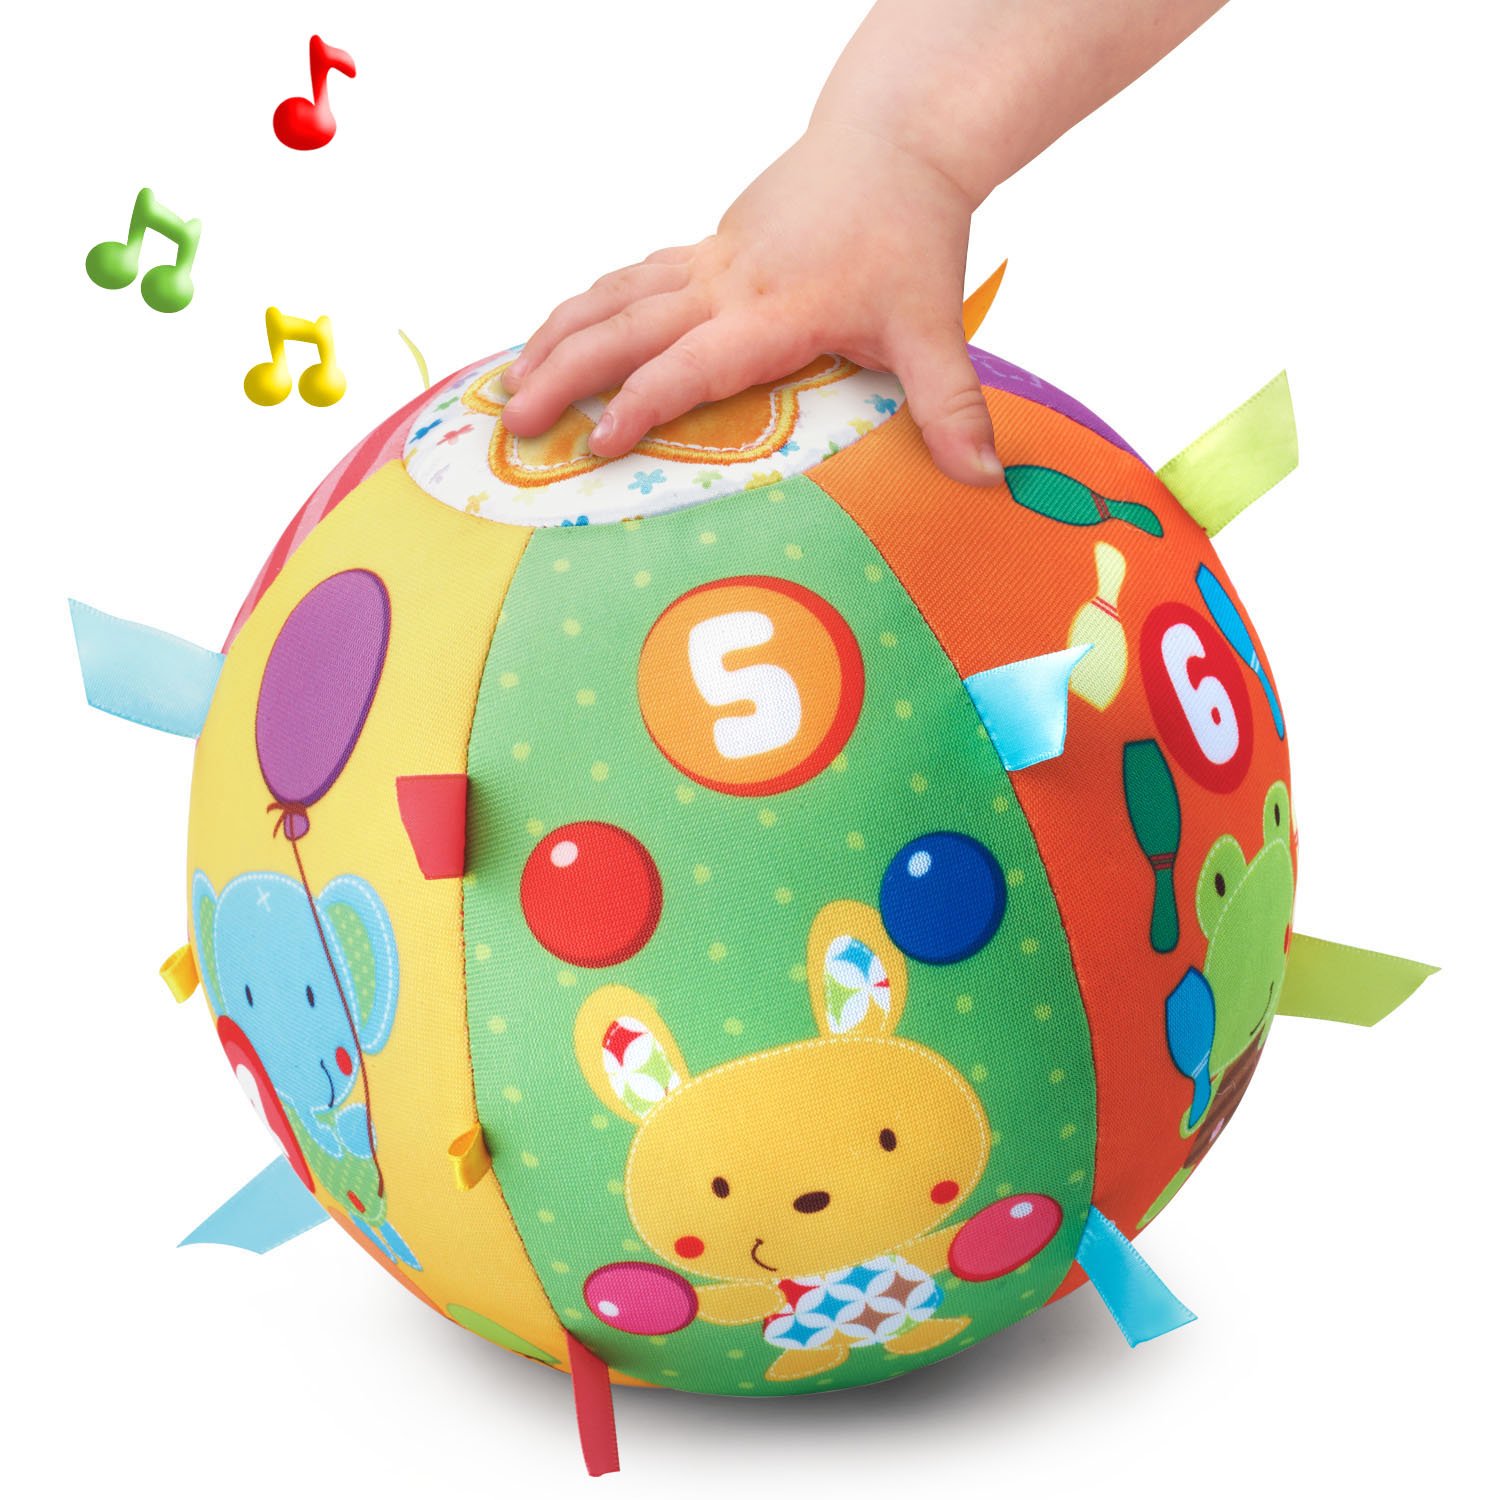 VTech Lil' Critters Roll & Discover Ball,Multicolor